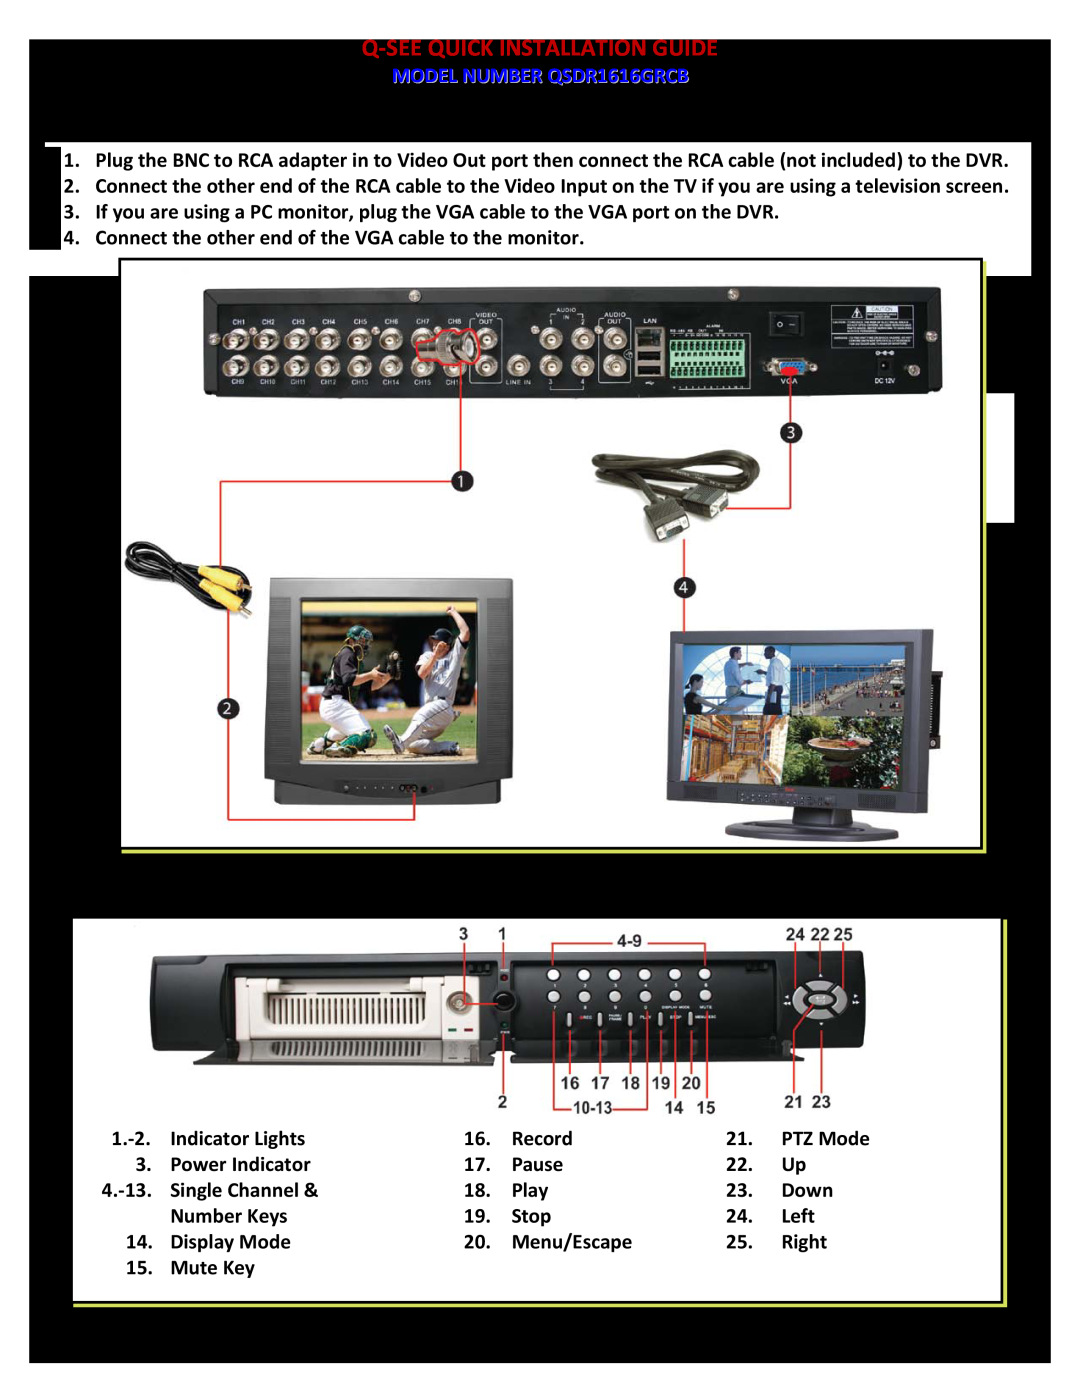 Q-See qsdr1616grcb PART 3 - CONNECTING THE DVR TO YOUR TV, PART 4 - DVR CONTROLS FRONT PANEL, MODEL NUMBER QSDR1616GRCB 